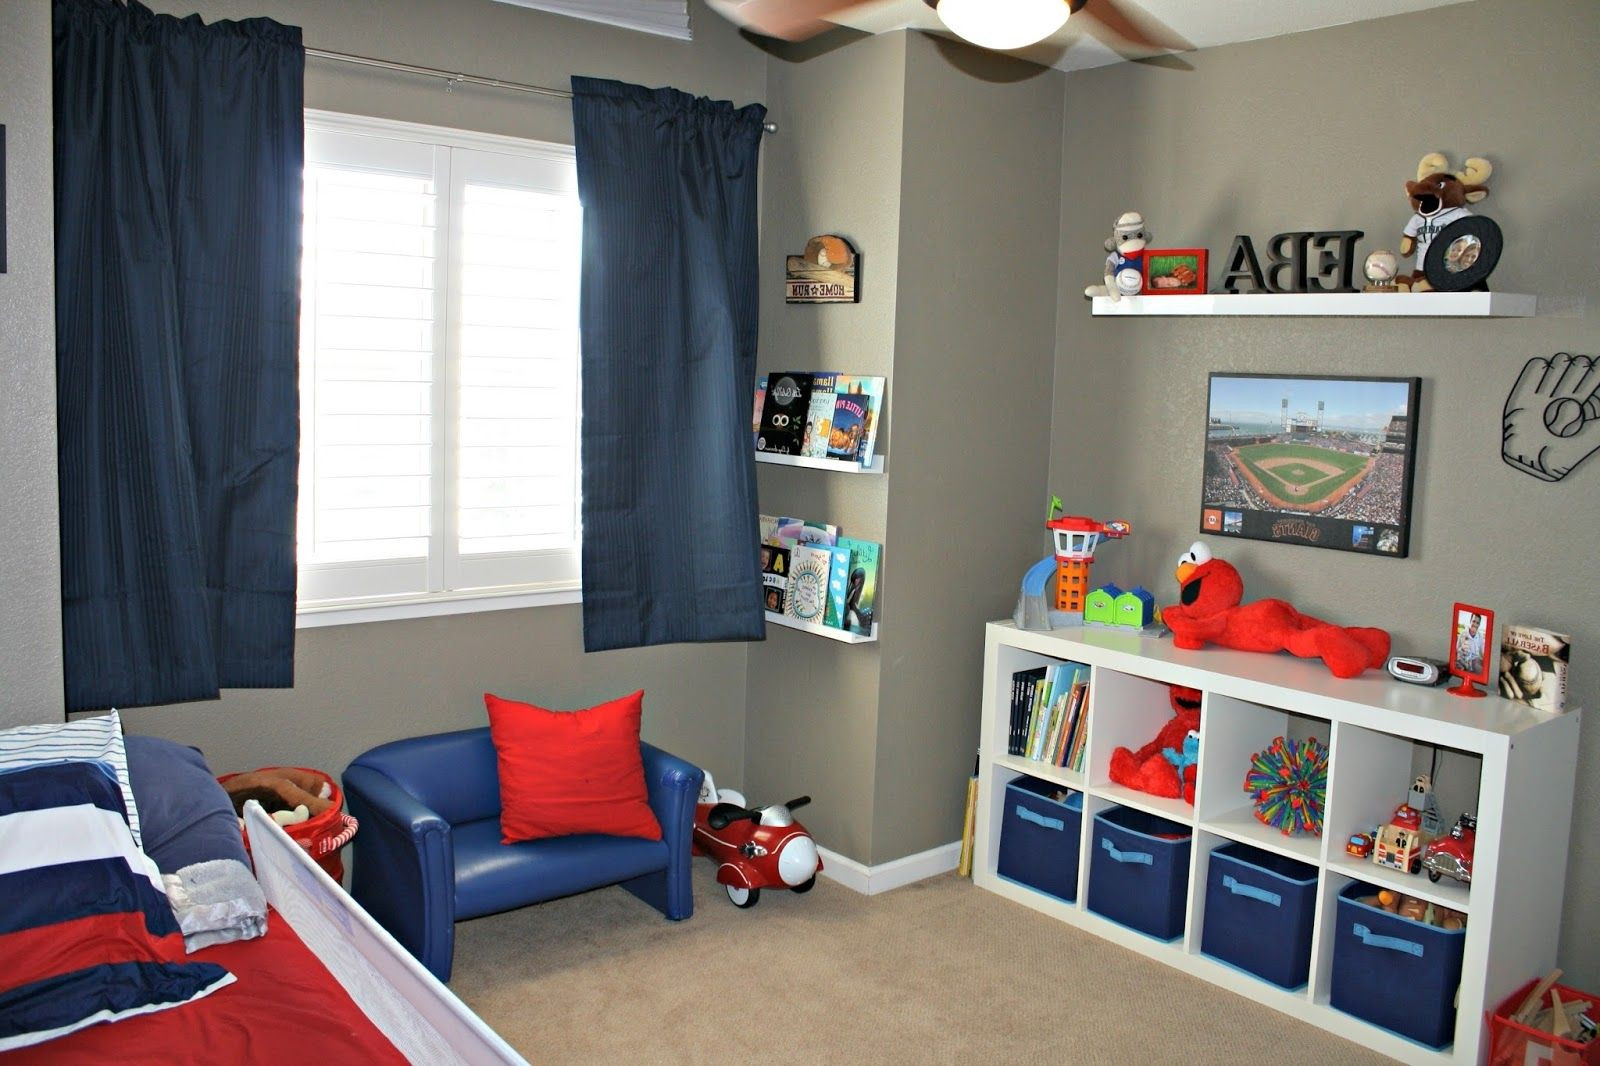 Painting Ideas For Boy Bedroom
 baseball bedroom painting ideas Google Search